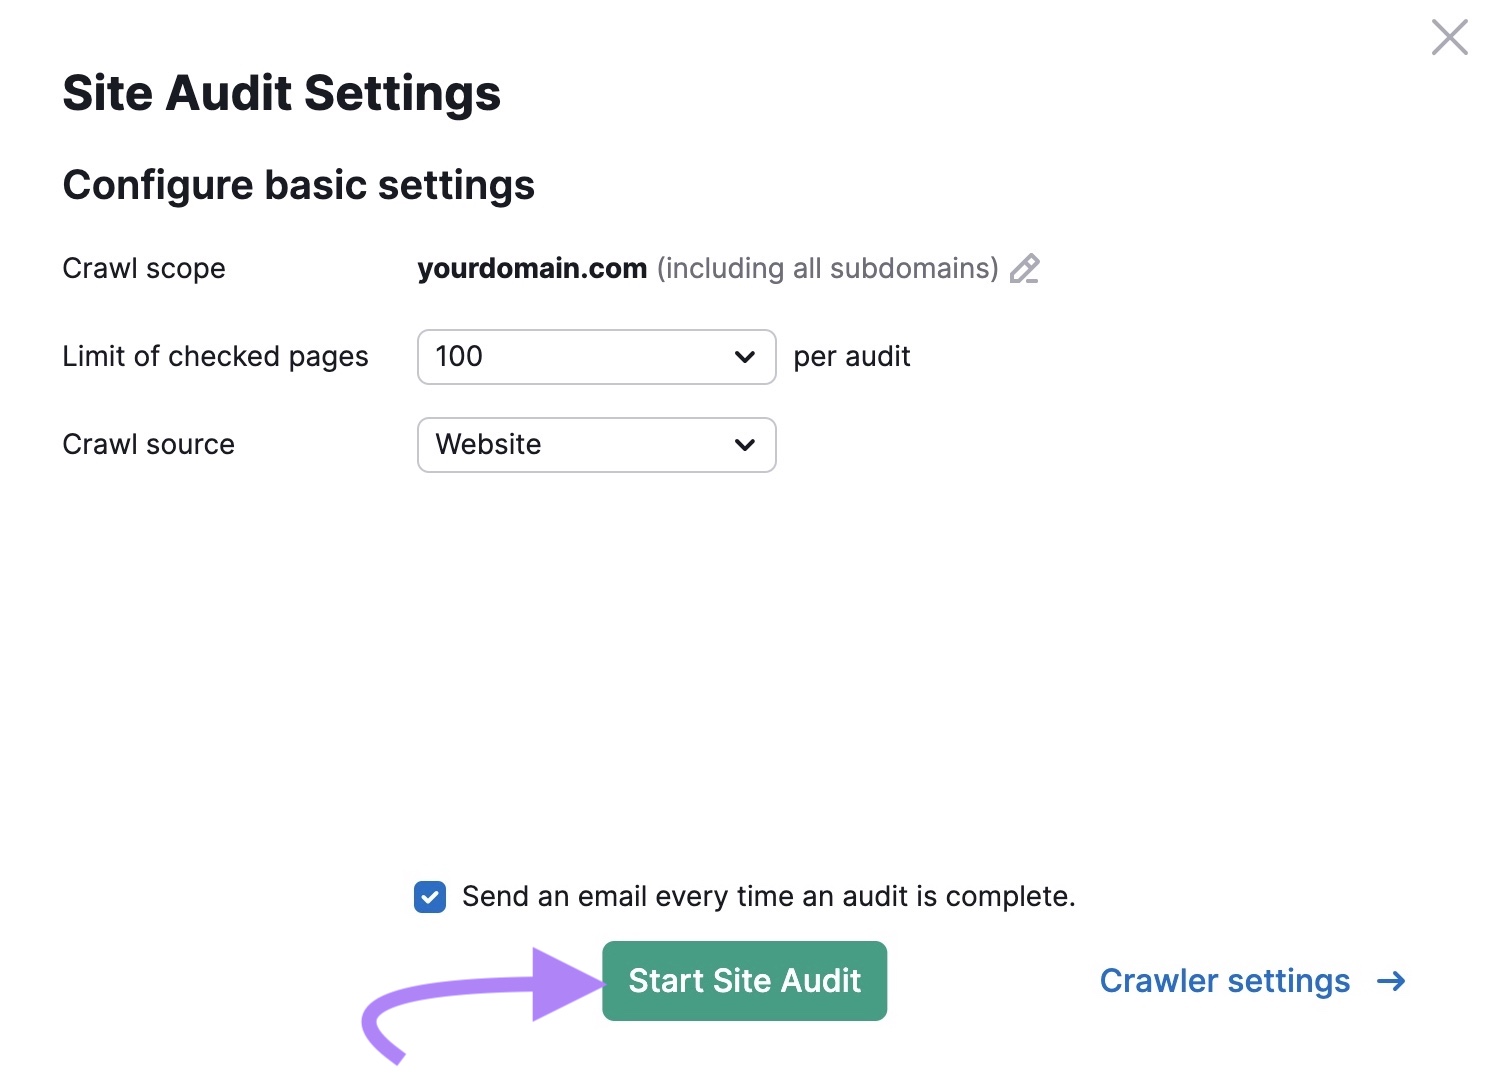 Site Audit settings page with the 'Start Site Audit' button clicked.